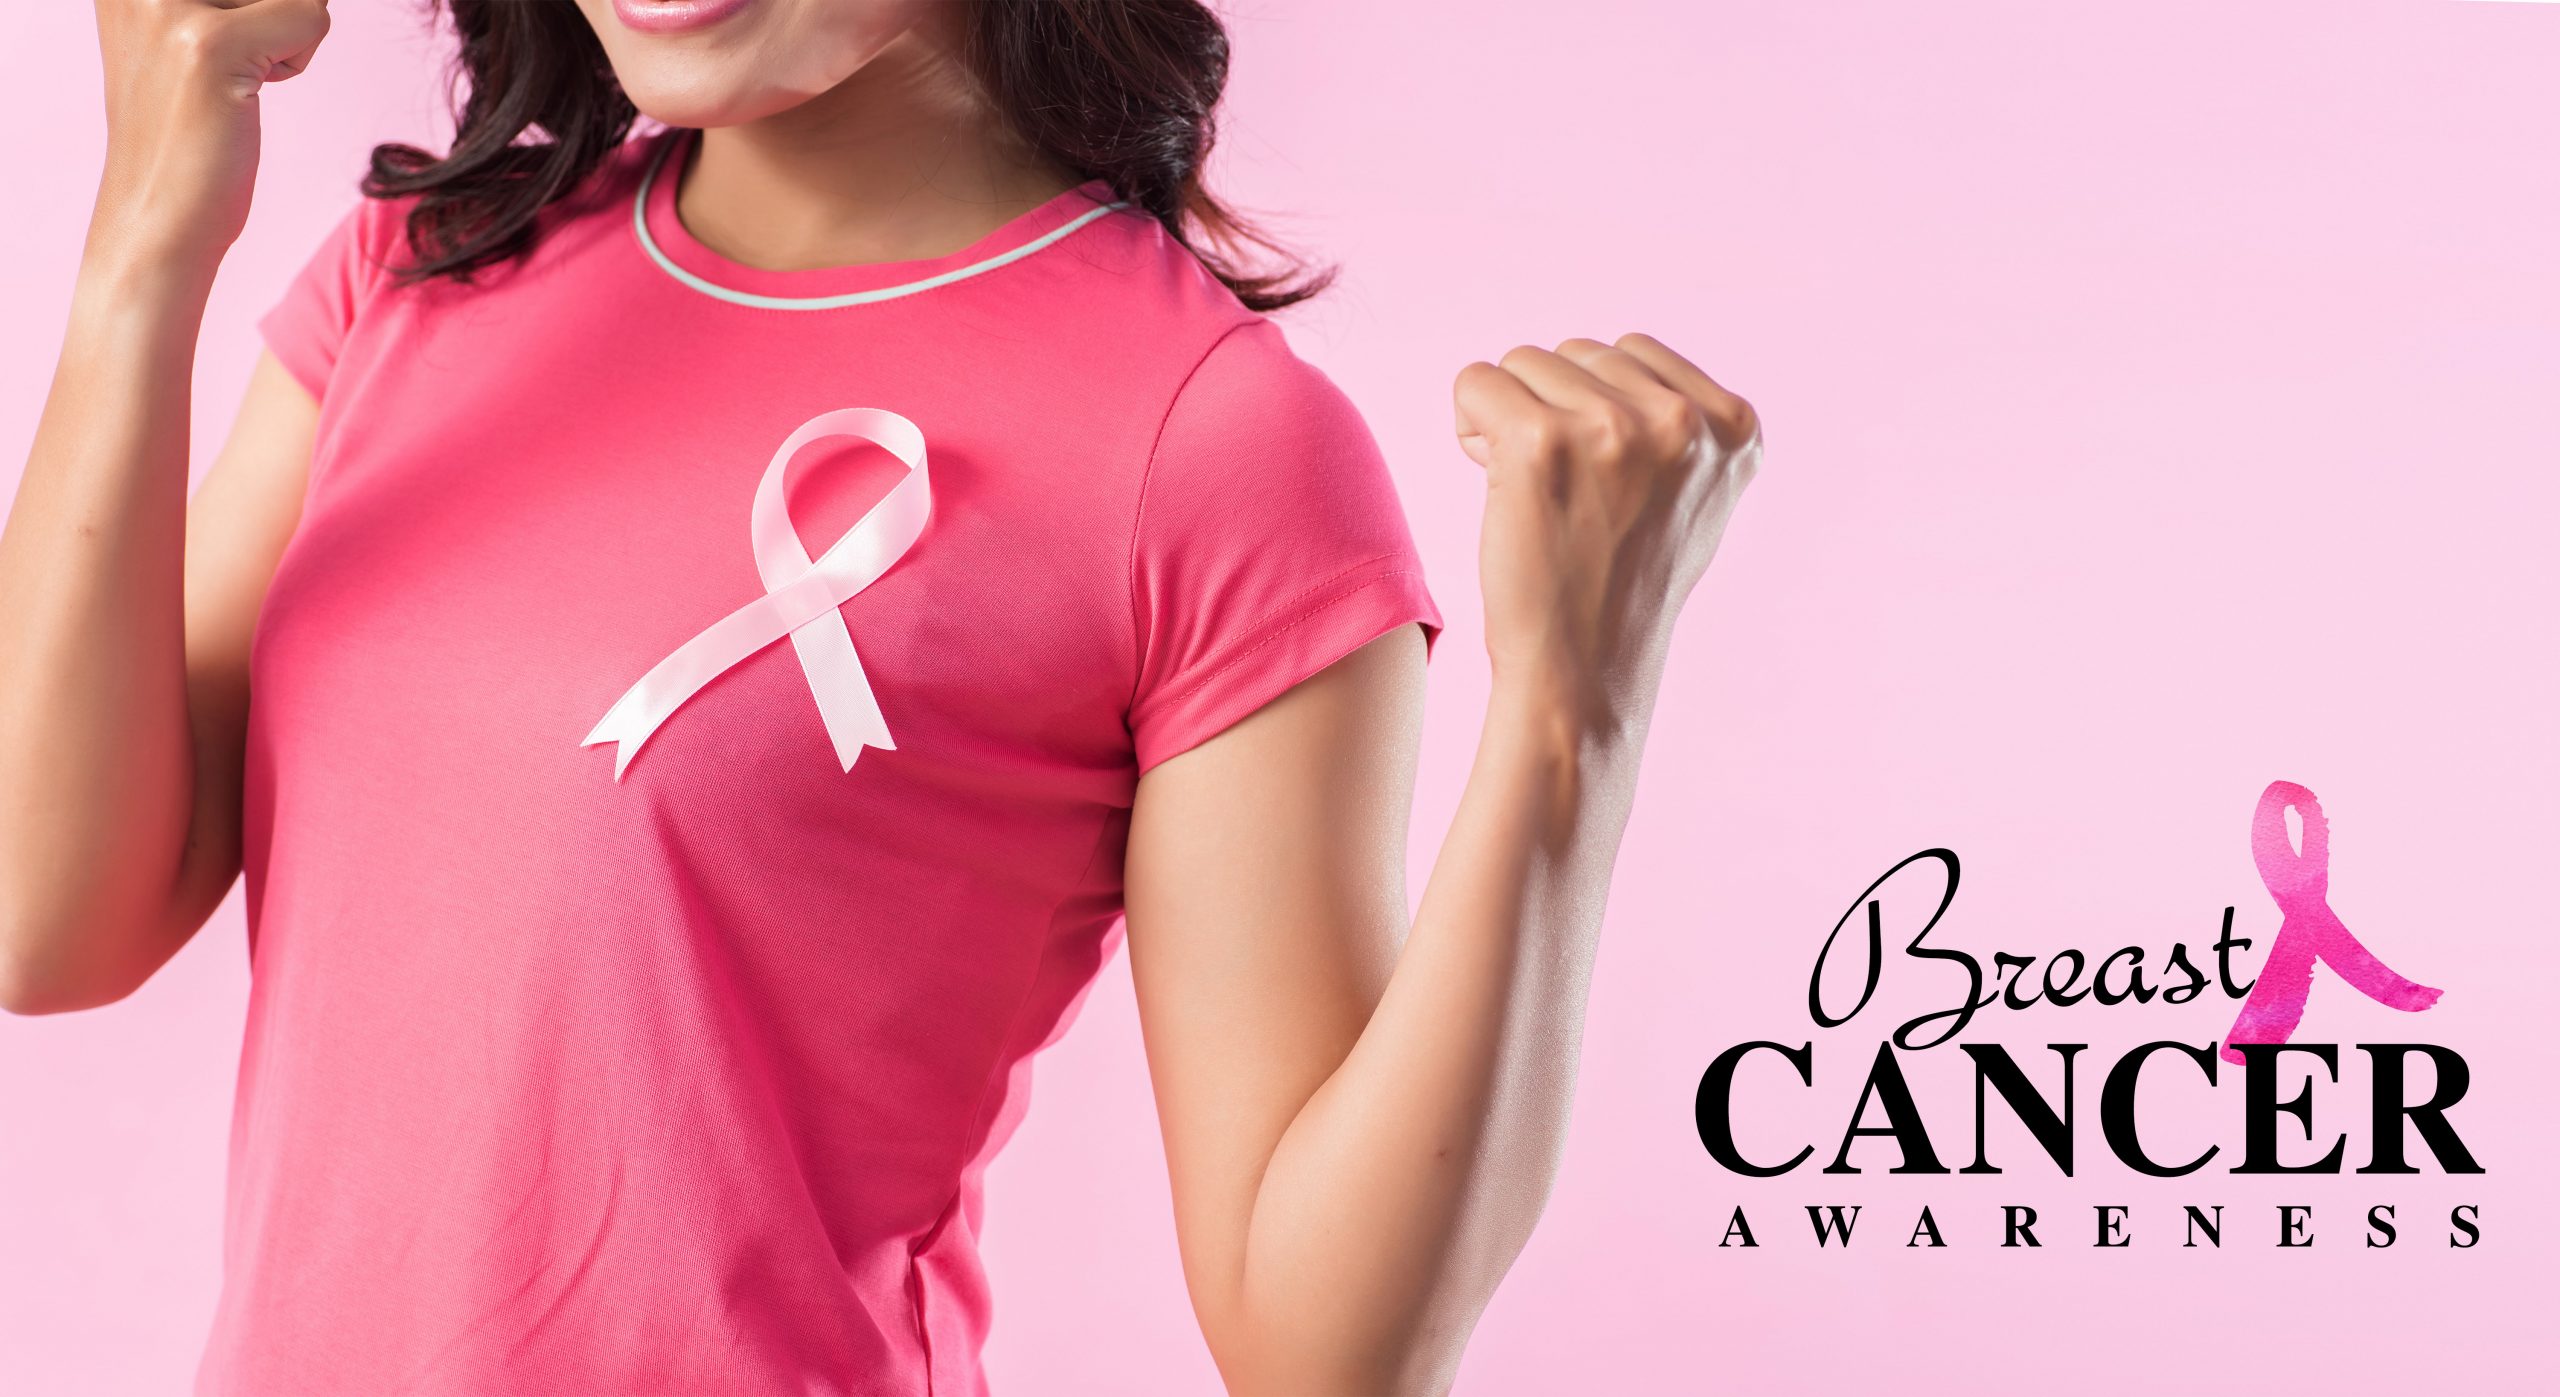 Breast Cancer Awareness Month: It is time to take a step forward and act on it